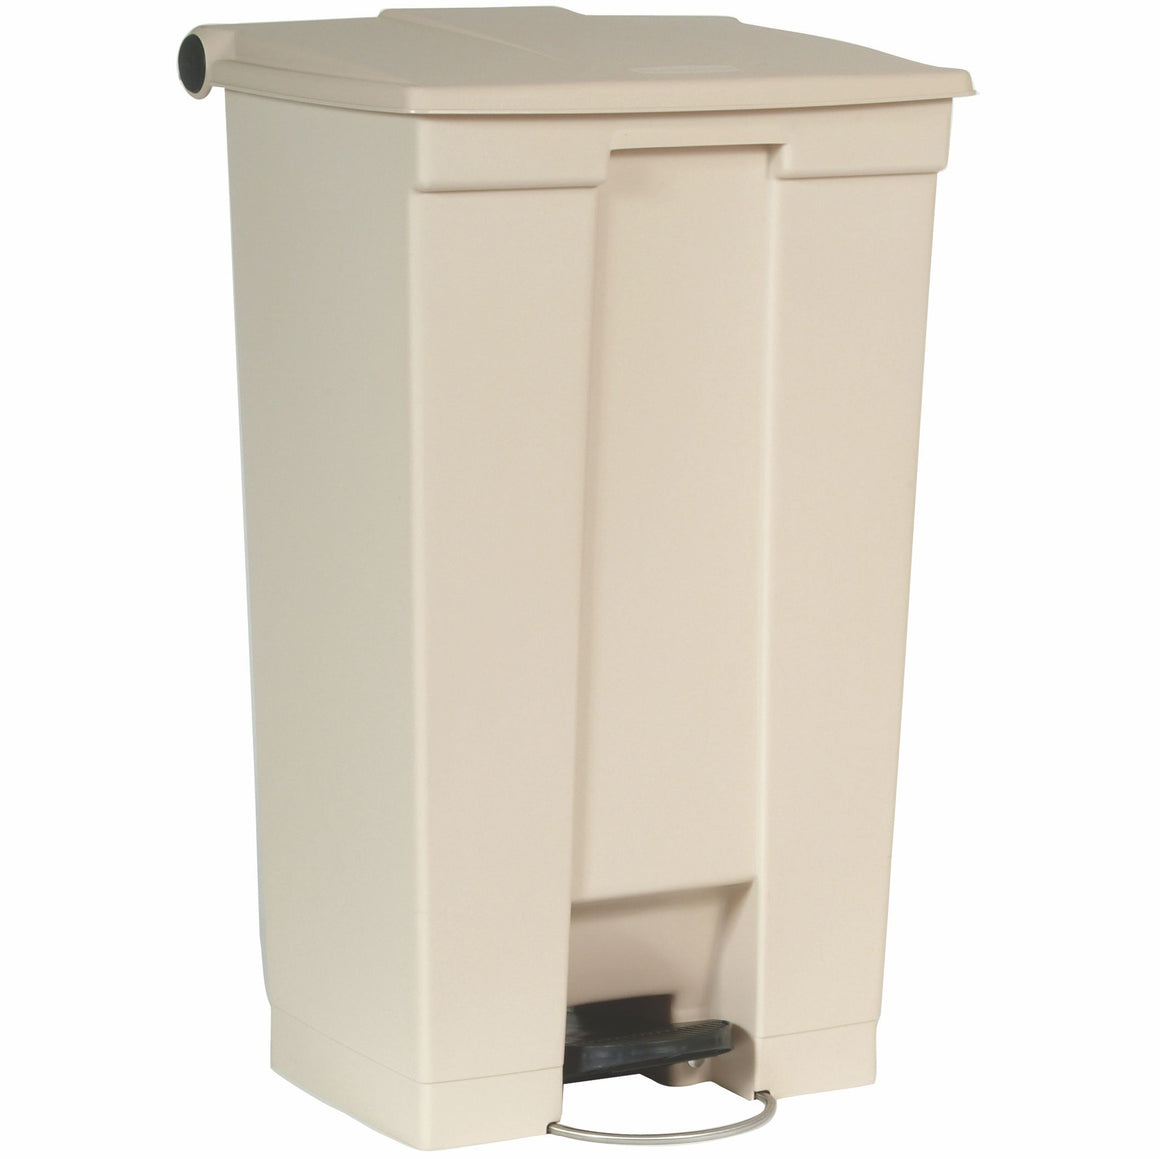 MOBILE STEP ON CONTAINER 23gal/87.1-lit BEIGE